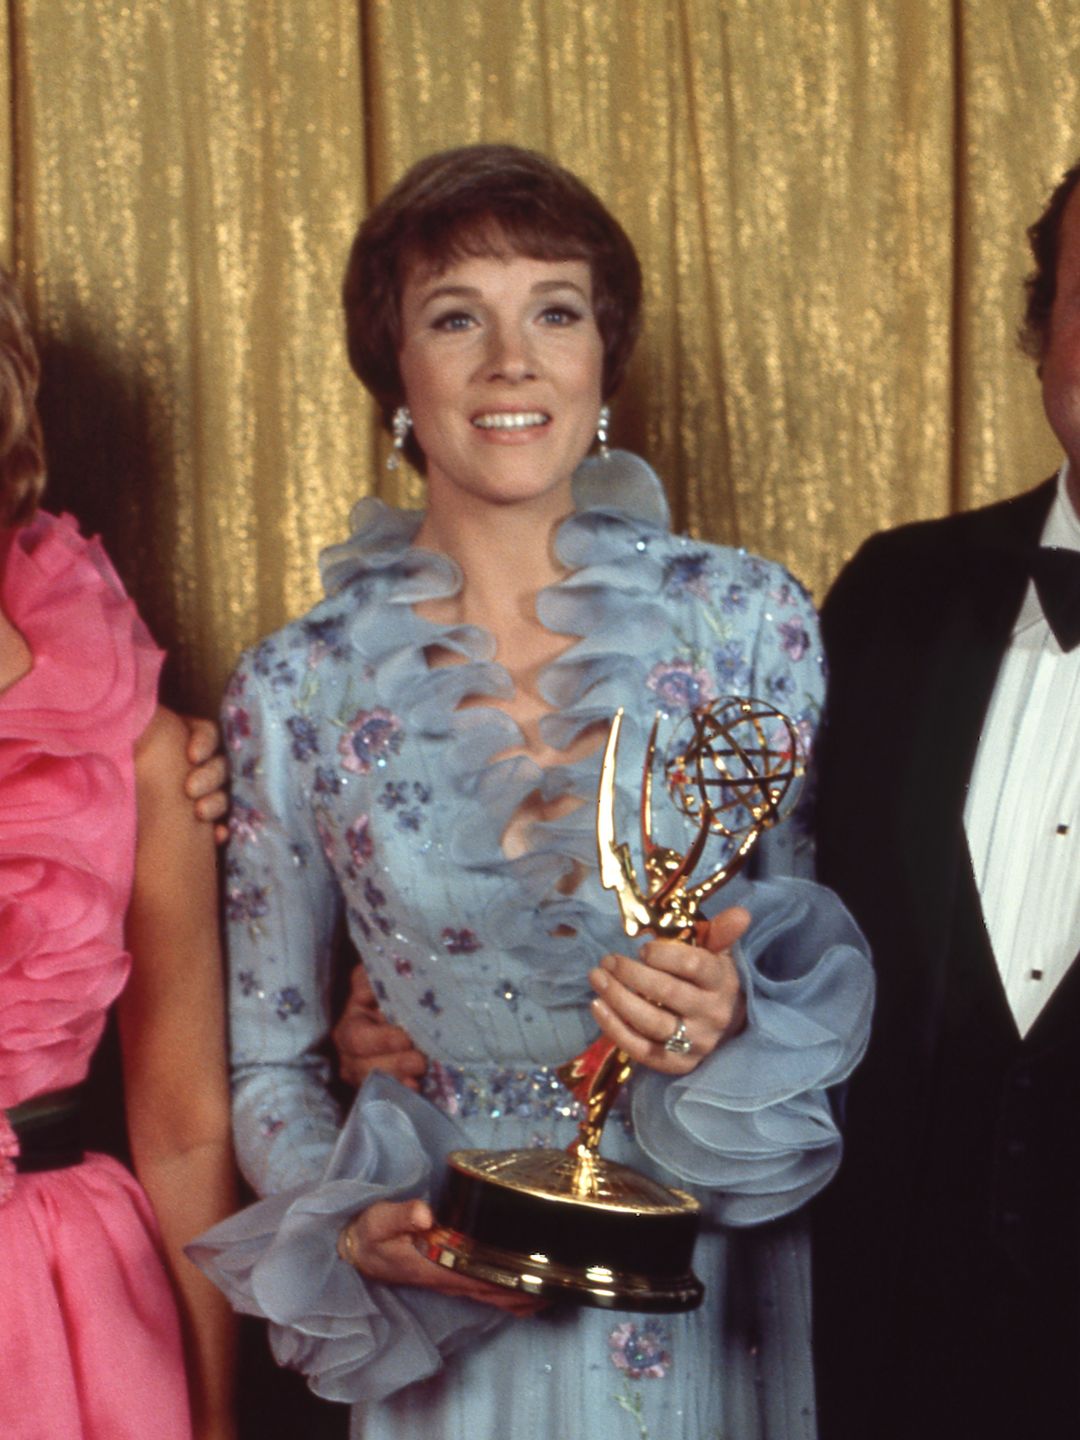 LOS ANGELES, CA - MAY 6: (L-R) Peter Falk, Mitzi Gaynor, Julie Andrews and William Conrad holding their Emmy Awards in the press room at The 24th Primetime Emmy Awards on May 6, 1972 at Pantages Theatre, Los Angeles, California. (Photo by Disney General Entertainment Content via Getty Images)